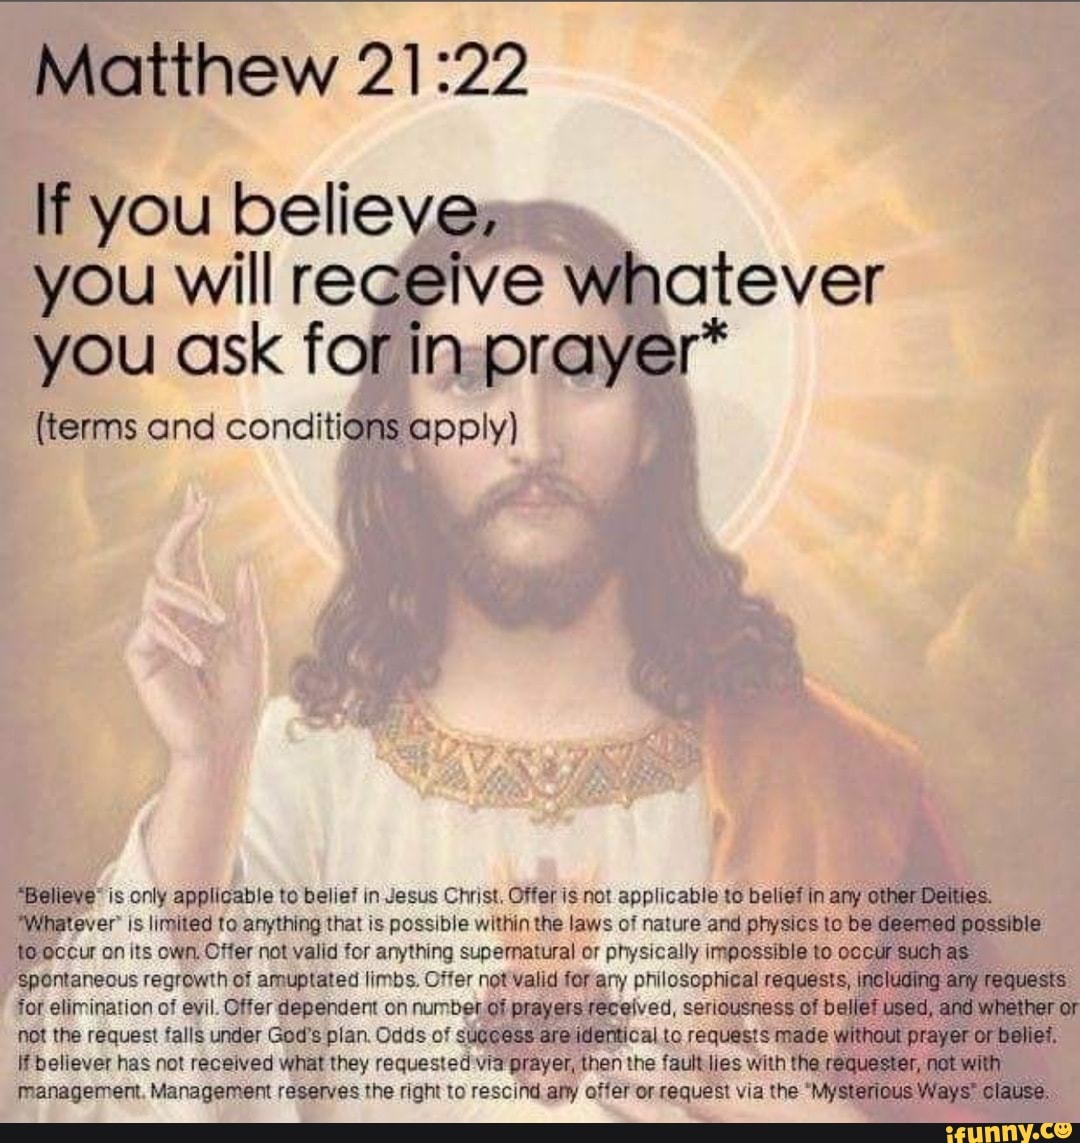 Offer request. Believe in what you Prayed for. Ask and you shall receive. Believe in that you Prayed for. Meme Prayer.